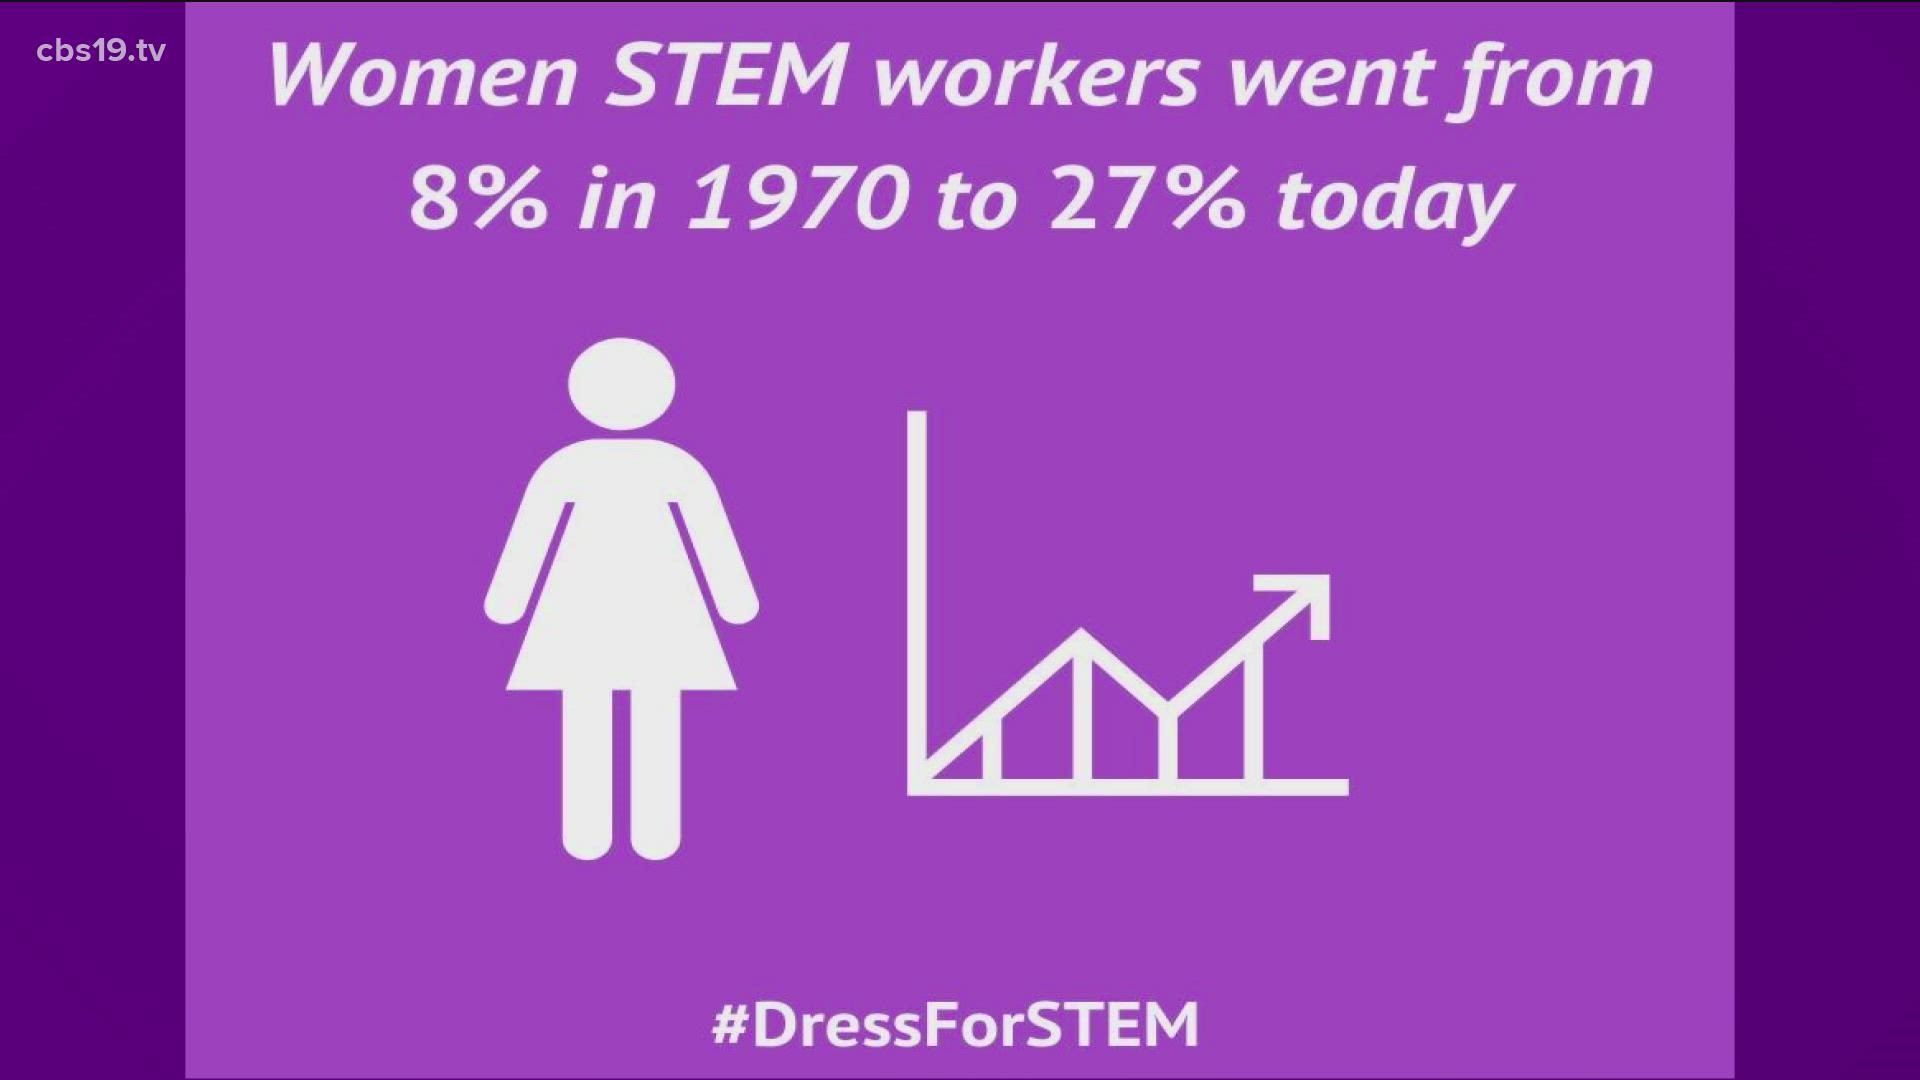 Dress for STEM is a movement that began in 2016, encourage young women to pursue their passions for science, tech, engineering and math careers